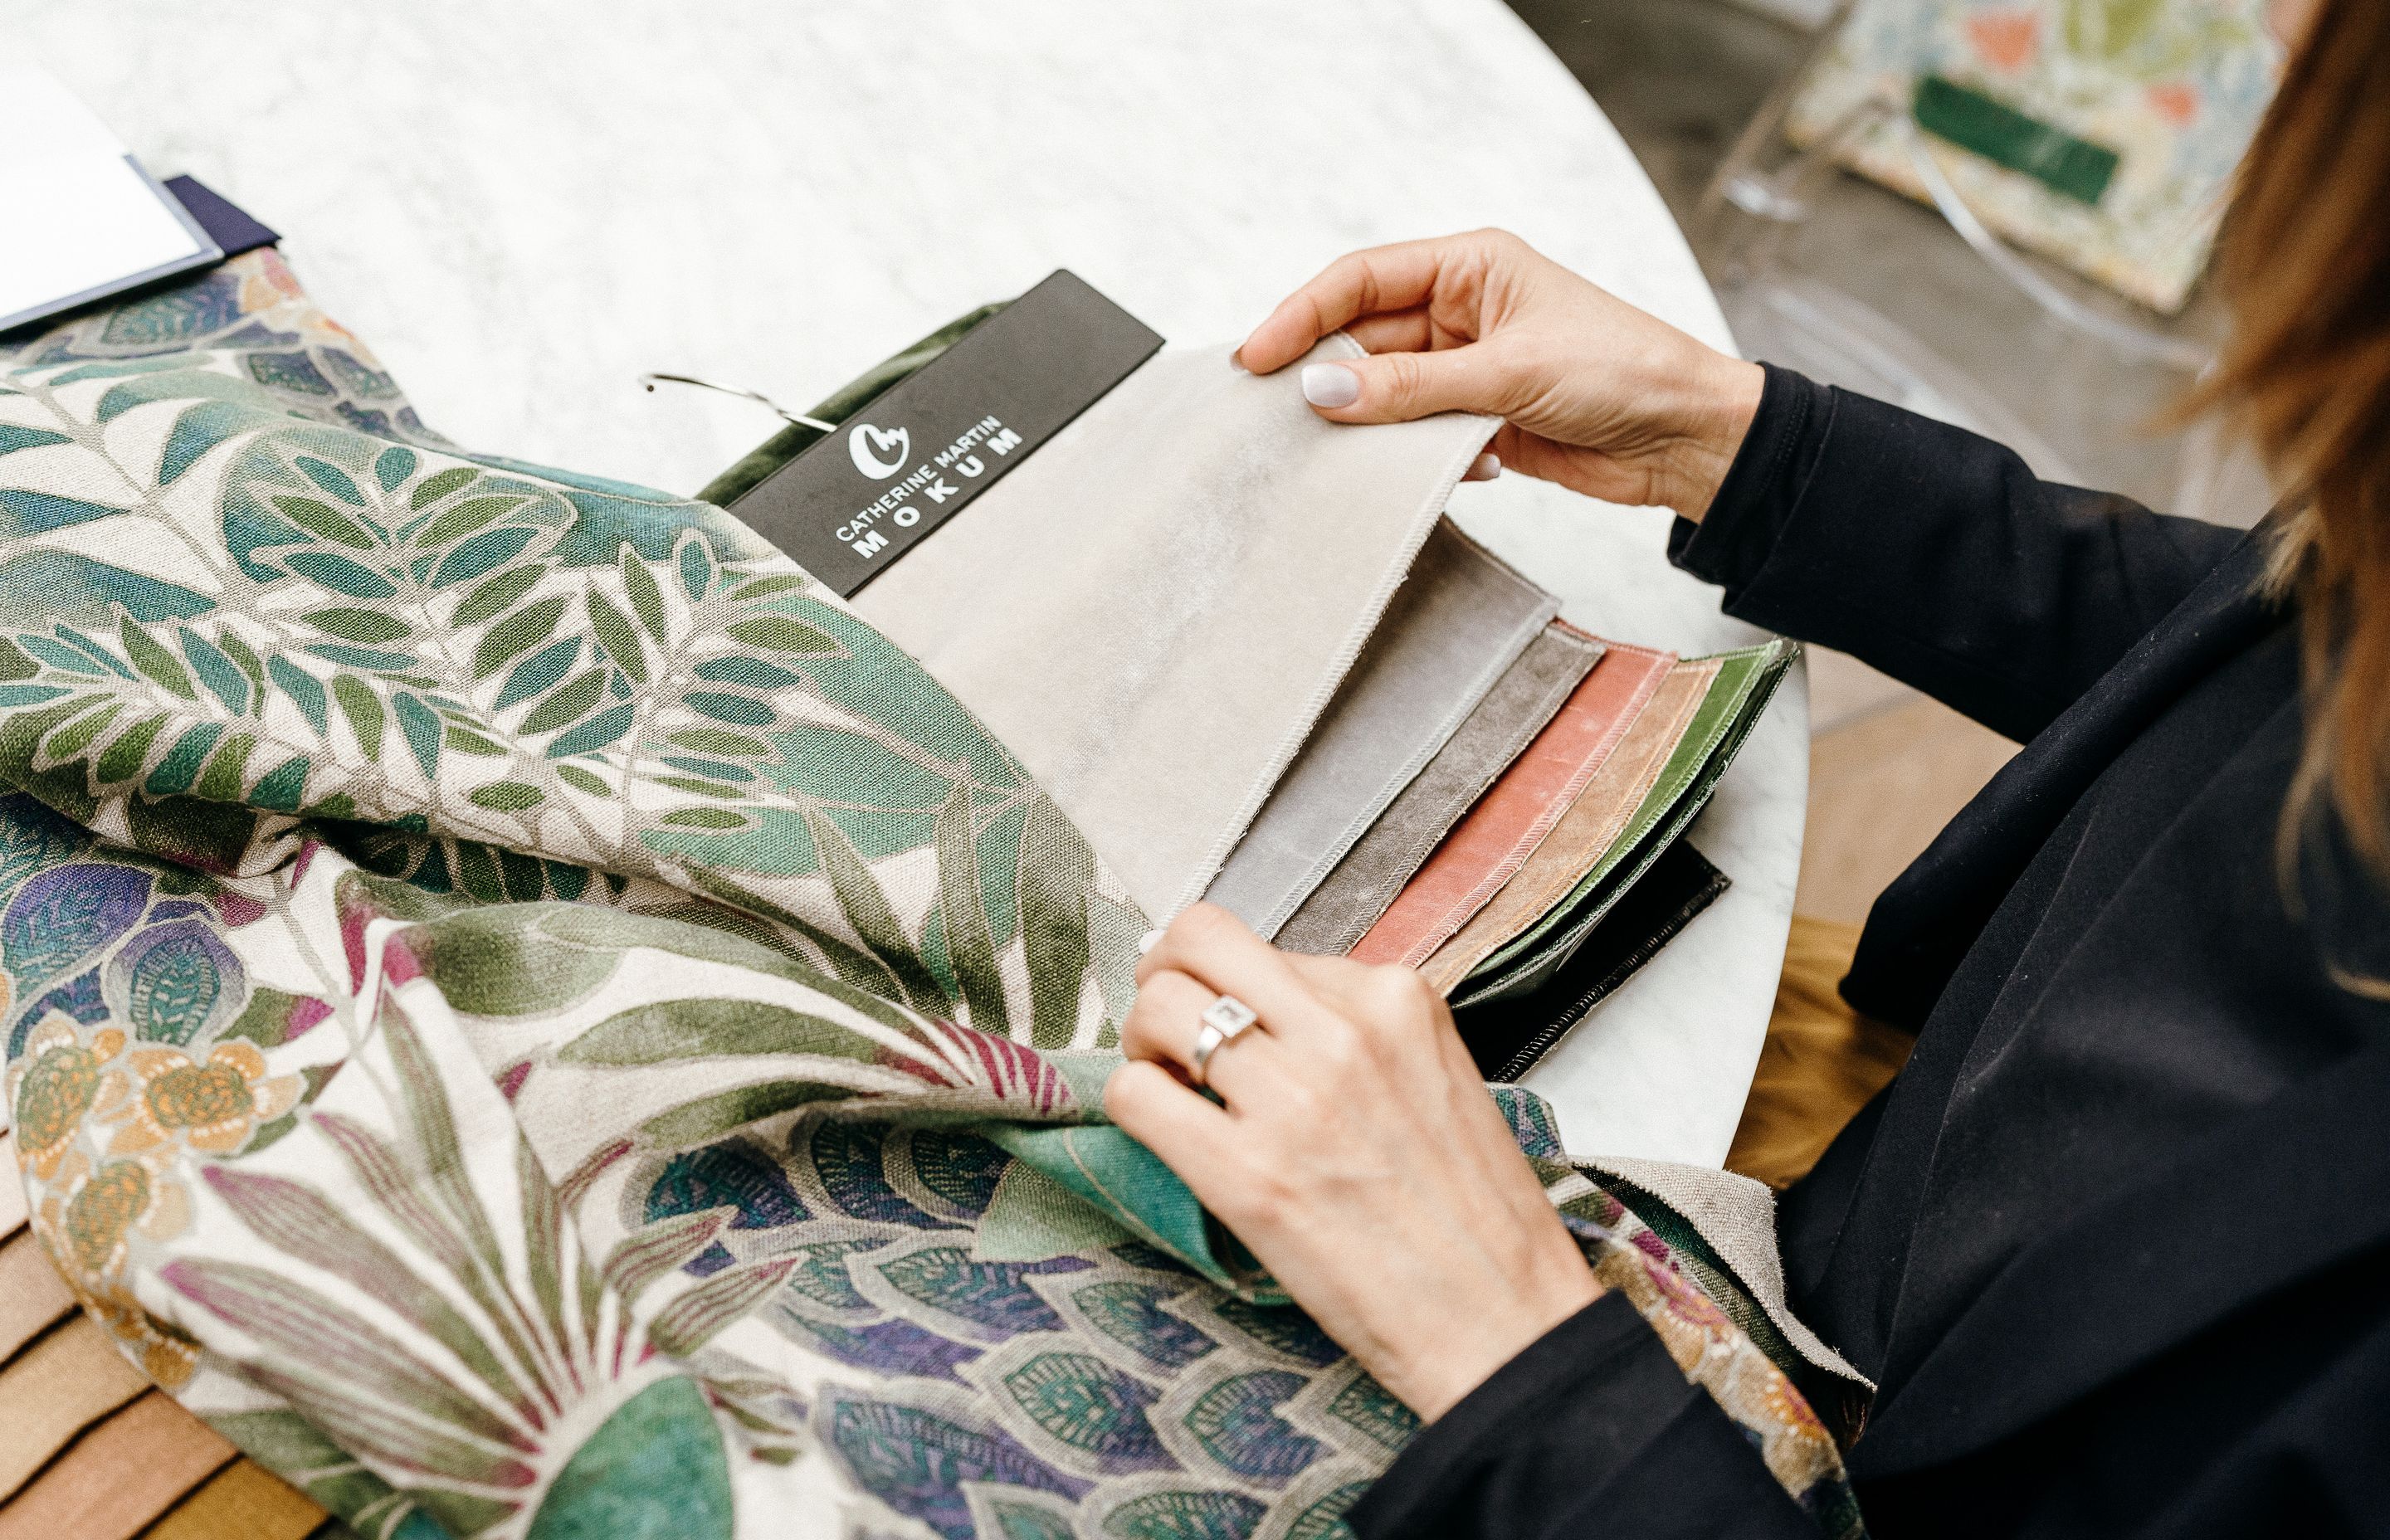 Bren sources beautiful textiles from all over the world through her suppliers. Above: Misia linen and Catherine Martin by Mokum Velvet. Photo: Samantha Donaldson